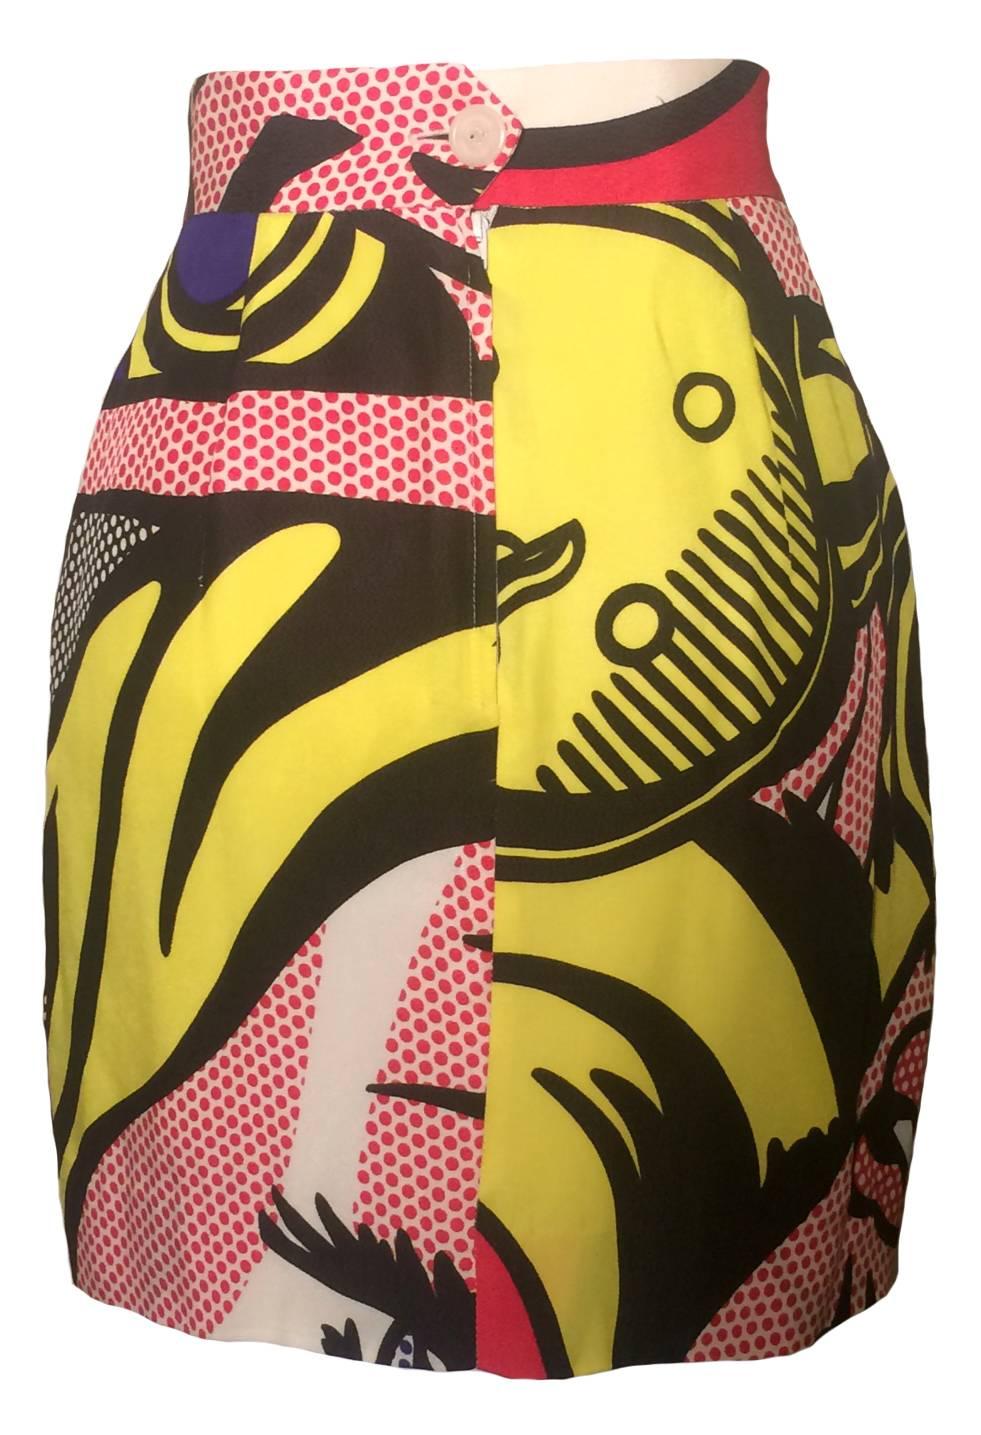 Rare & iconic 1990s Moschino Cheap & Chic Lichtenstein comic print pencil skirt. 

79% acetate, 21% rayon. Fully lined in 60% acetate, 40% rayon. 

Made in Italy. 

Size IT 40, US 6. Fits like a modern 2. 
Waist 25 1/2